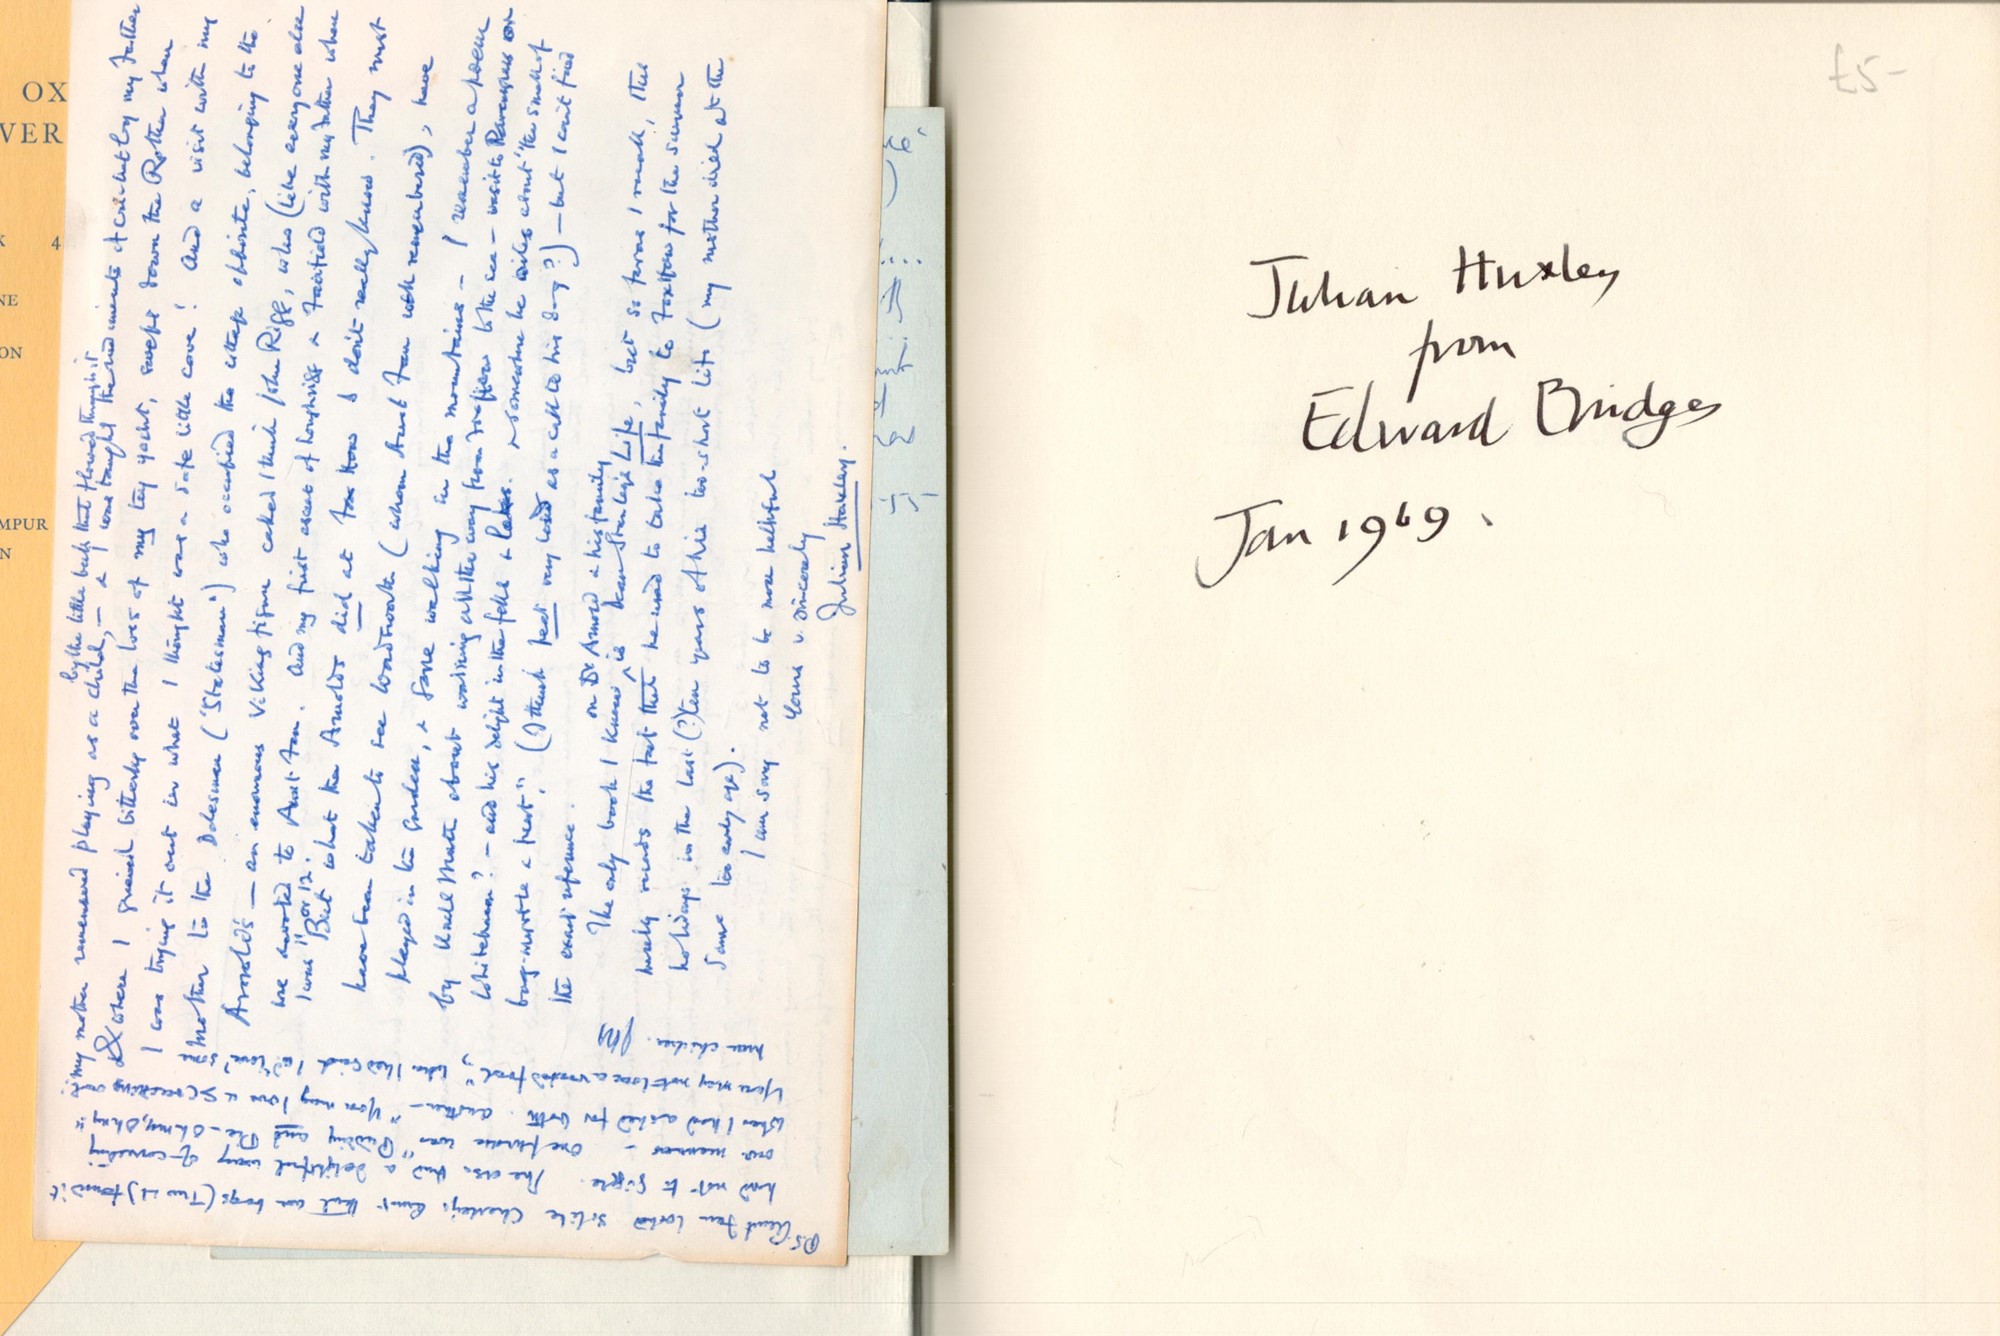 Sir Julian Huxley inscribed book and ALS dated Jan 1969 to him from Edward Bridges titled The - Image 3 of 4